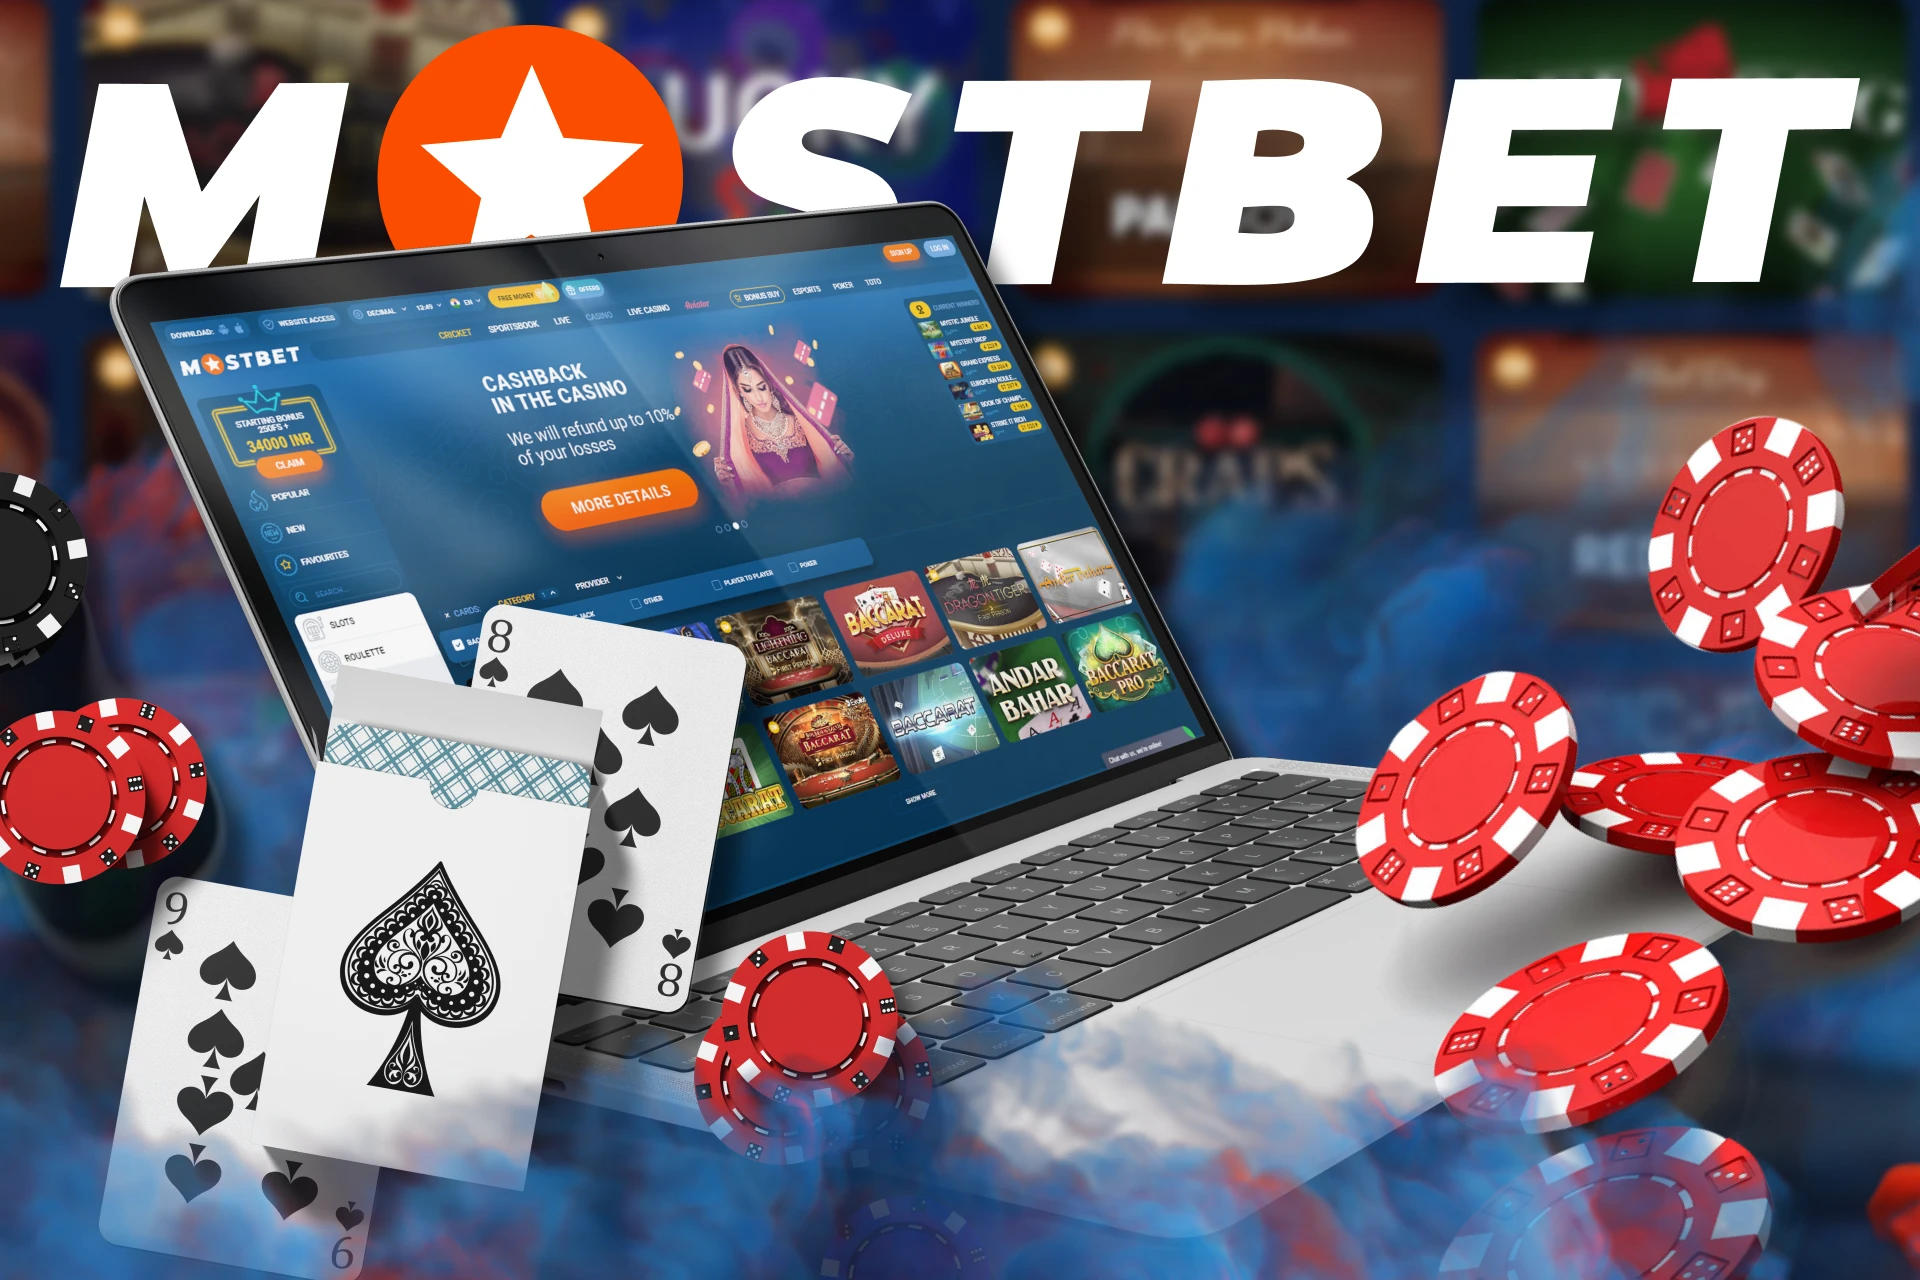 Play the more updated Baccarat Supreme game at Mostbet.